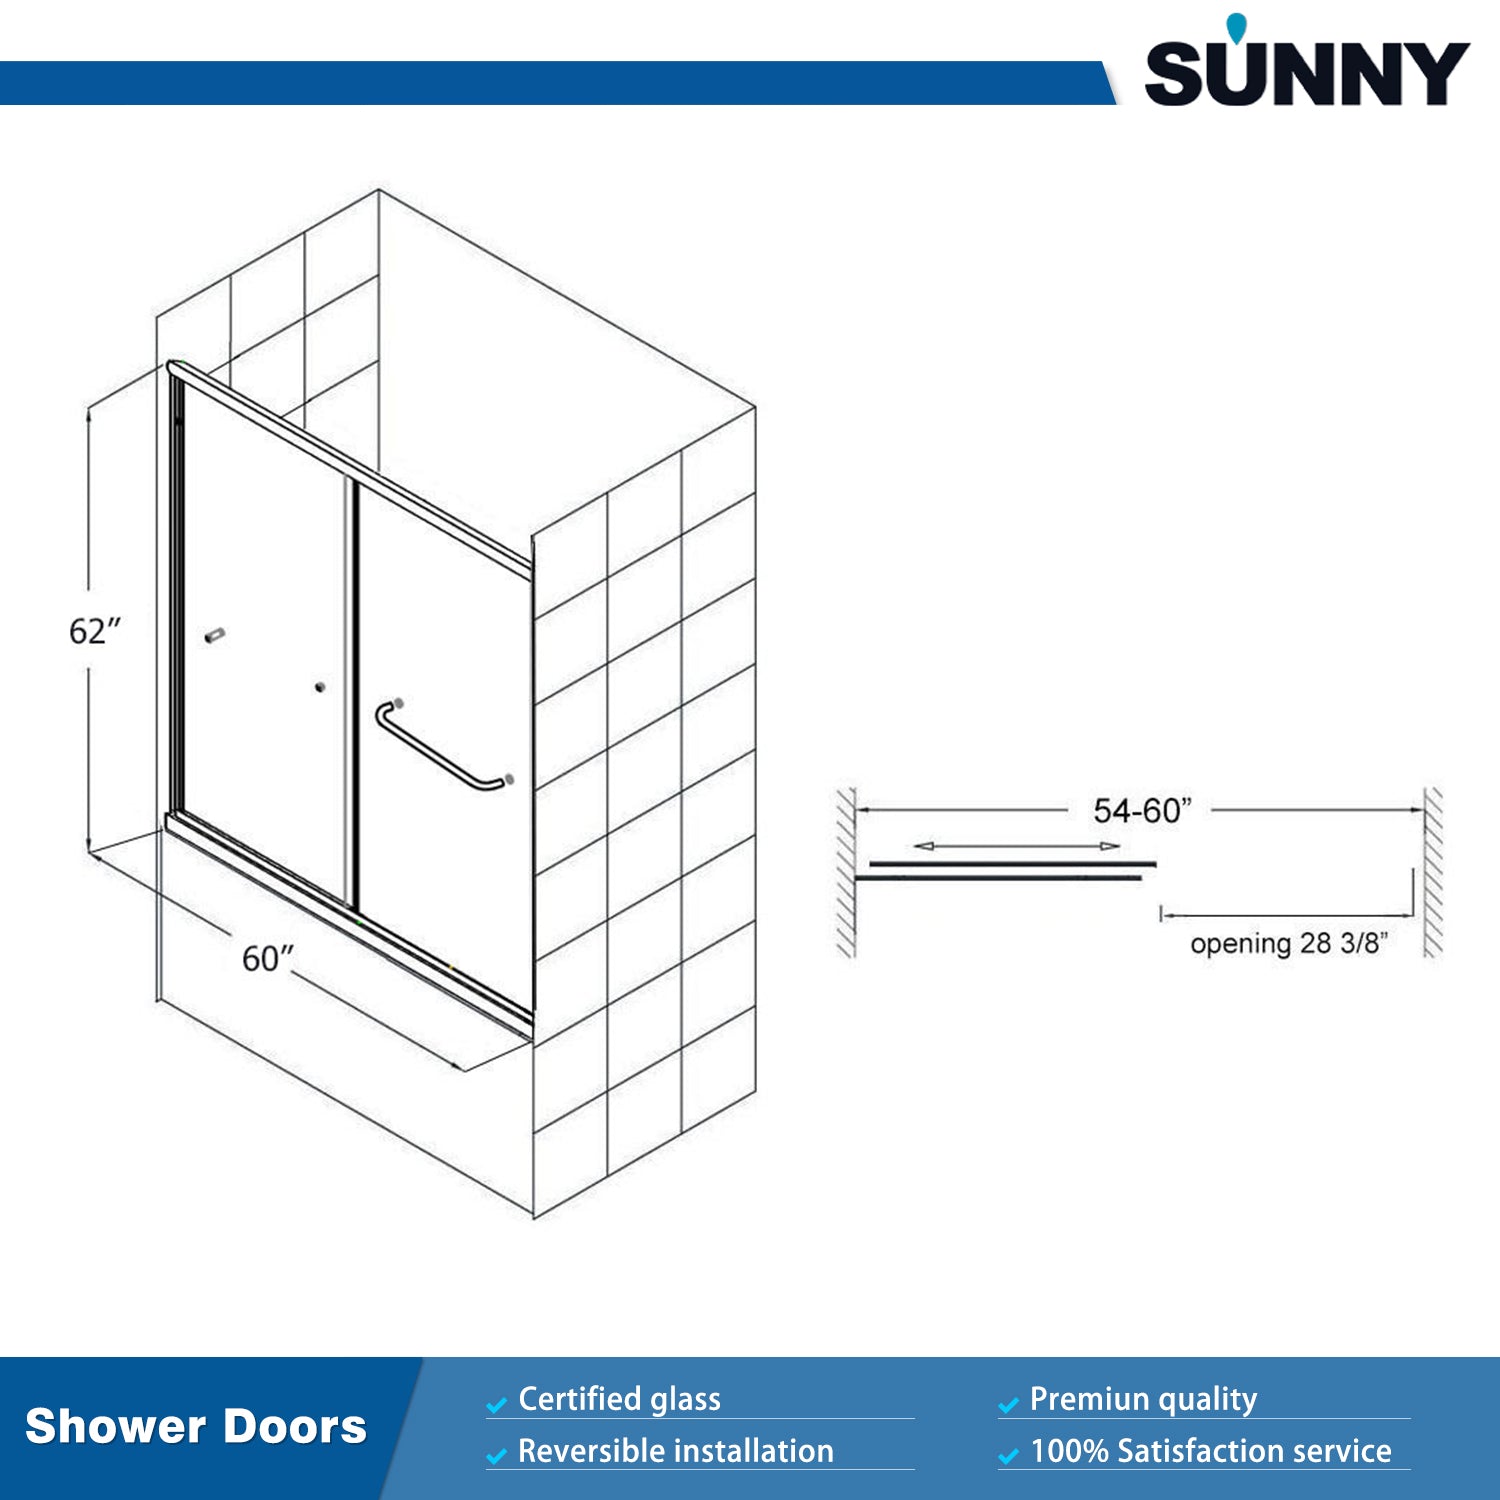 SUNNY SHOWER 60 in. W x 62 in. H Bathtub Double Sliding Doors Size Chart